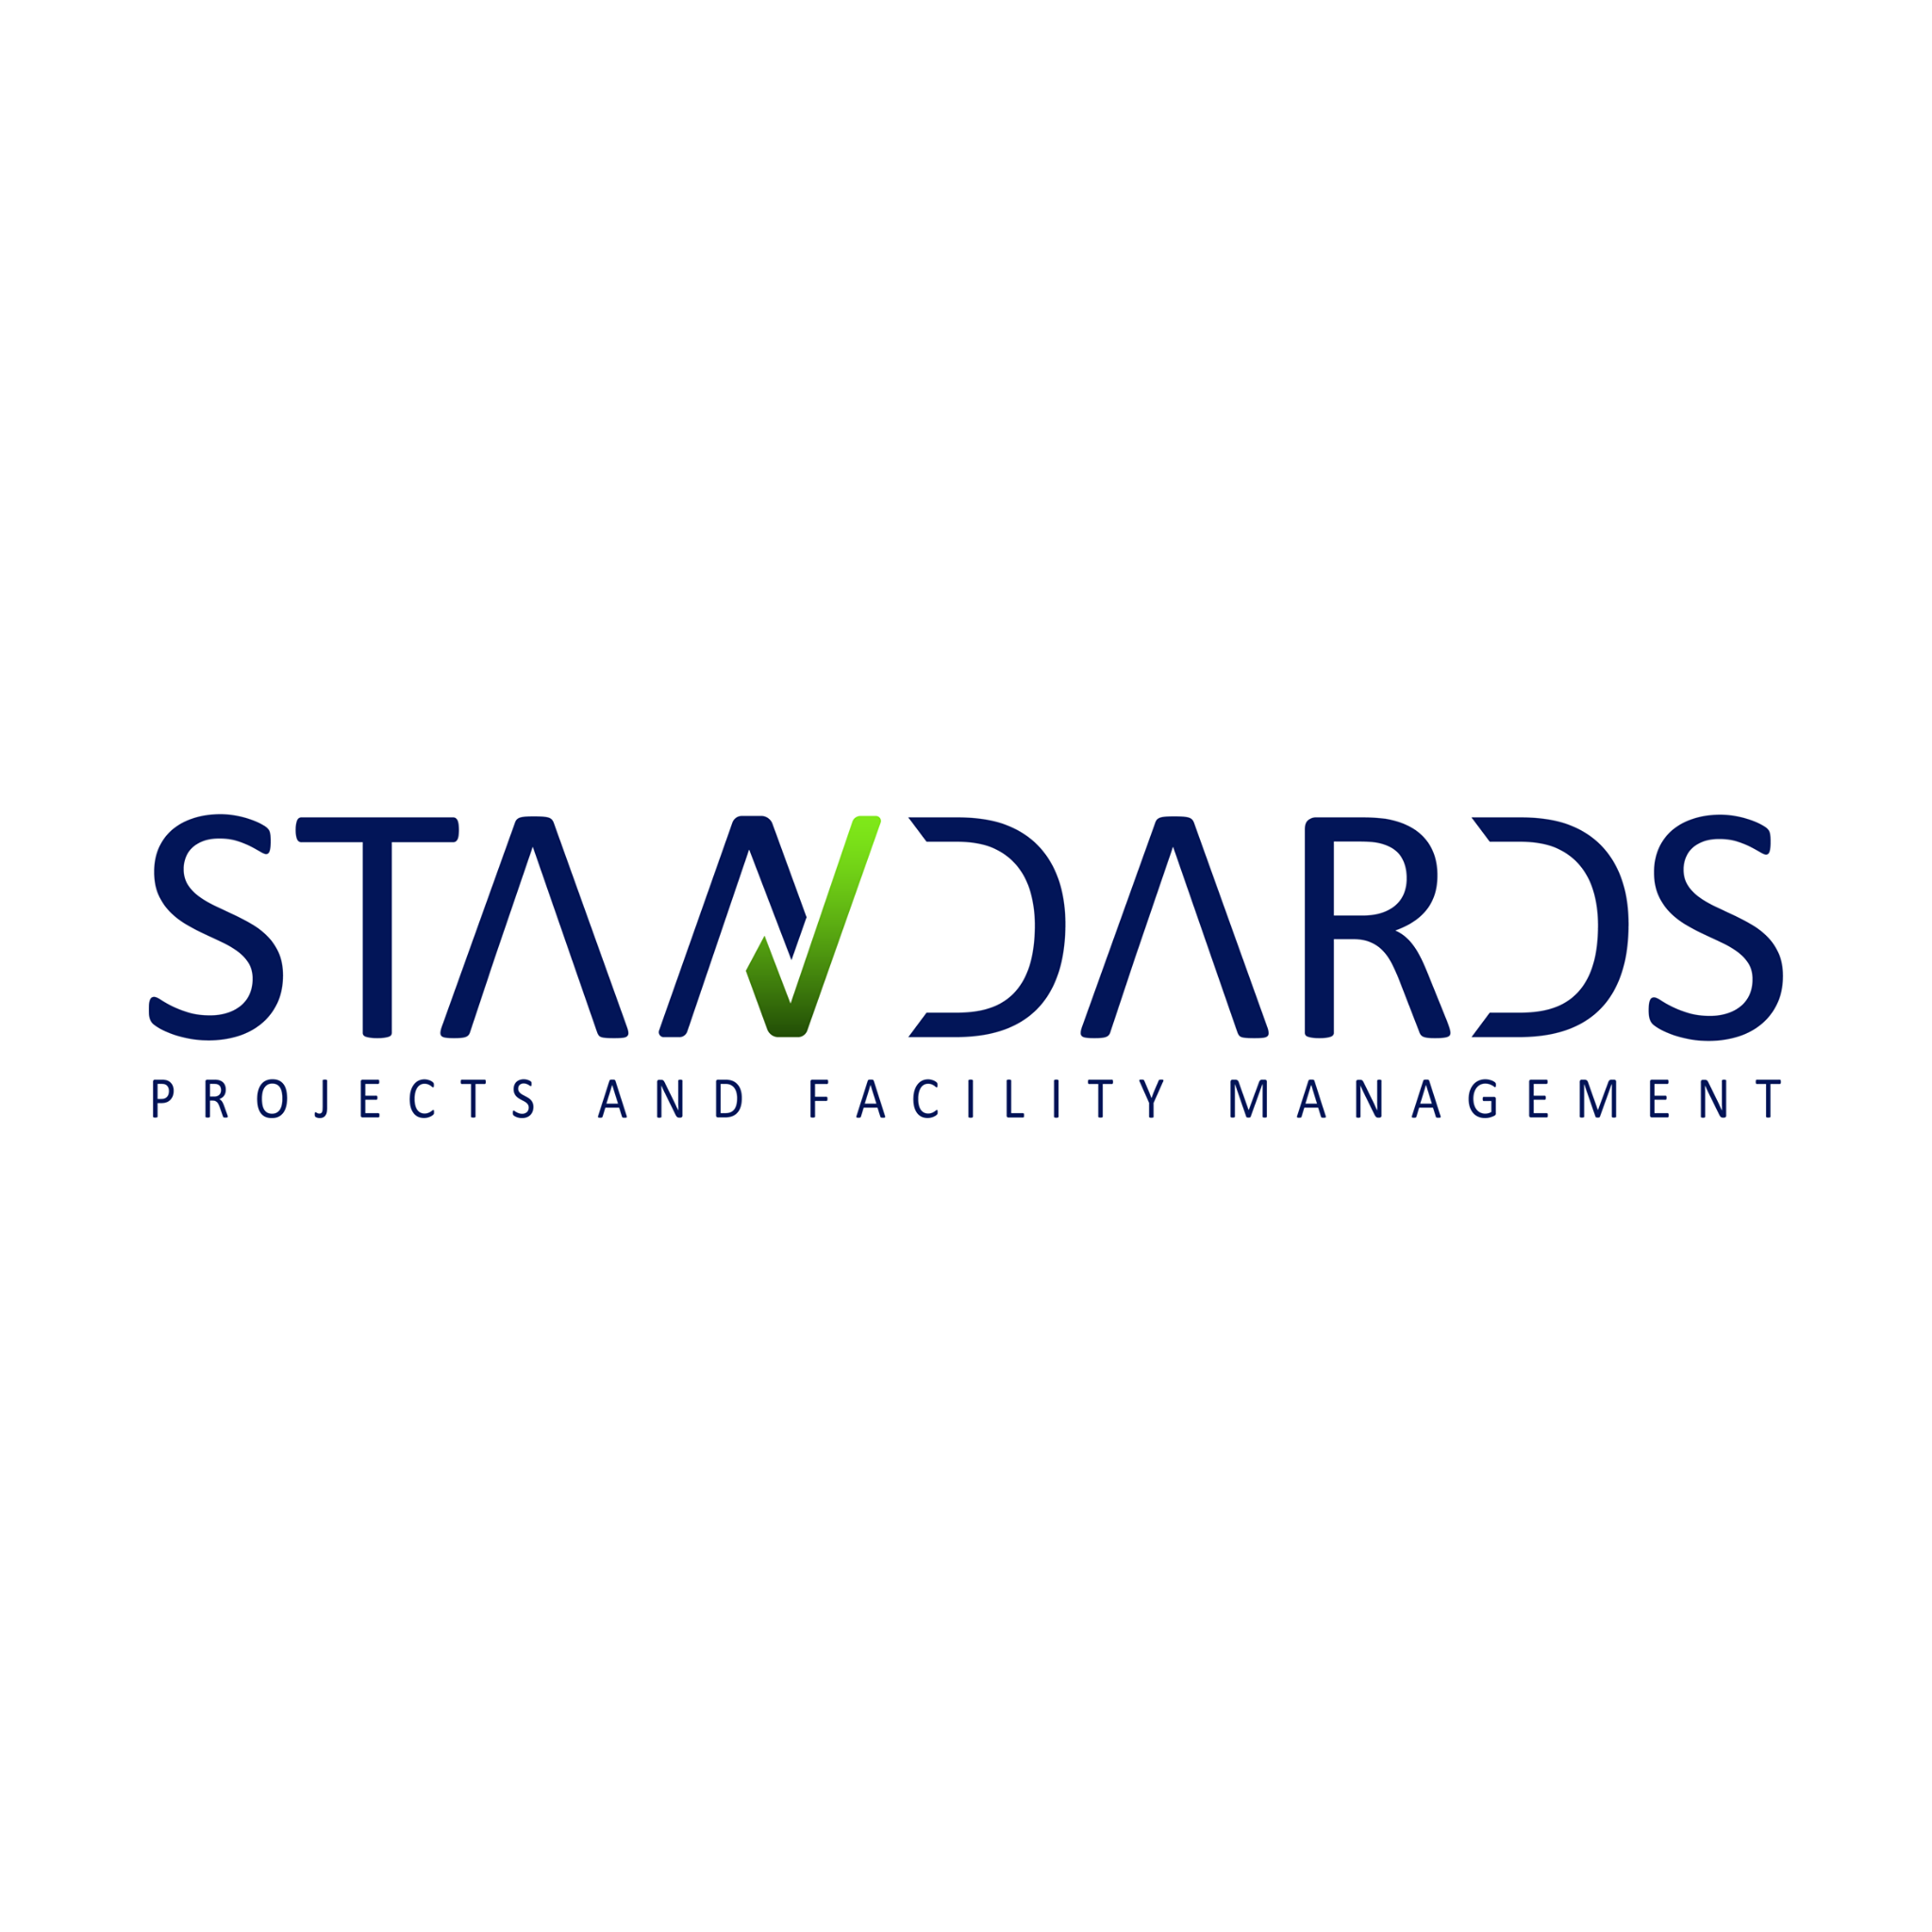 Standards facility management